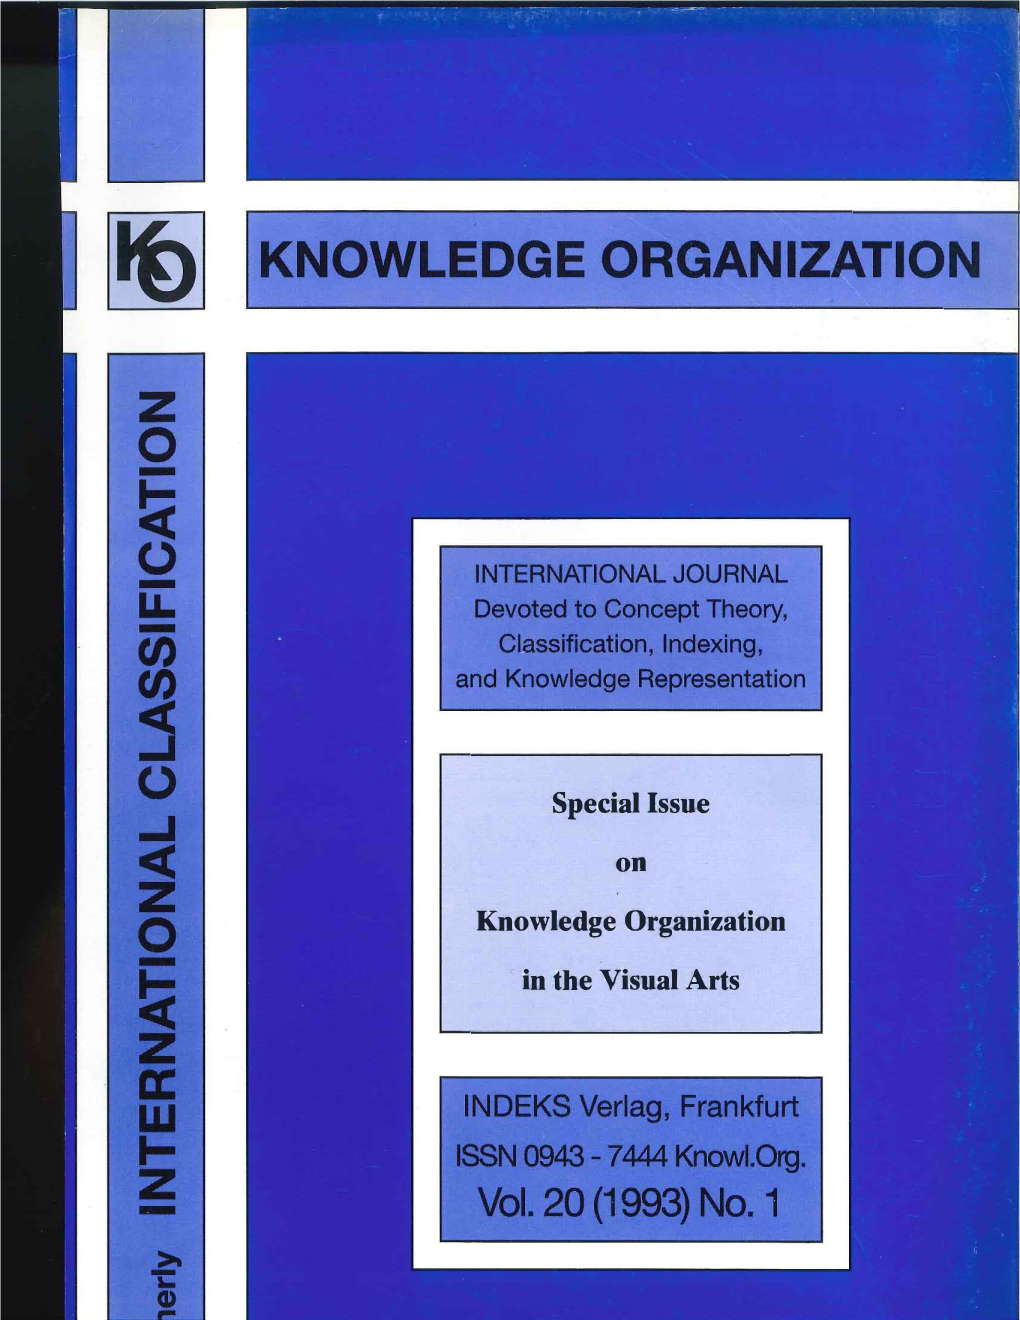 Special Issue on Knowledge Organization in the Visual Arts